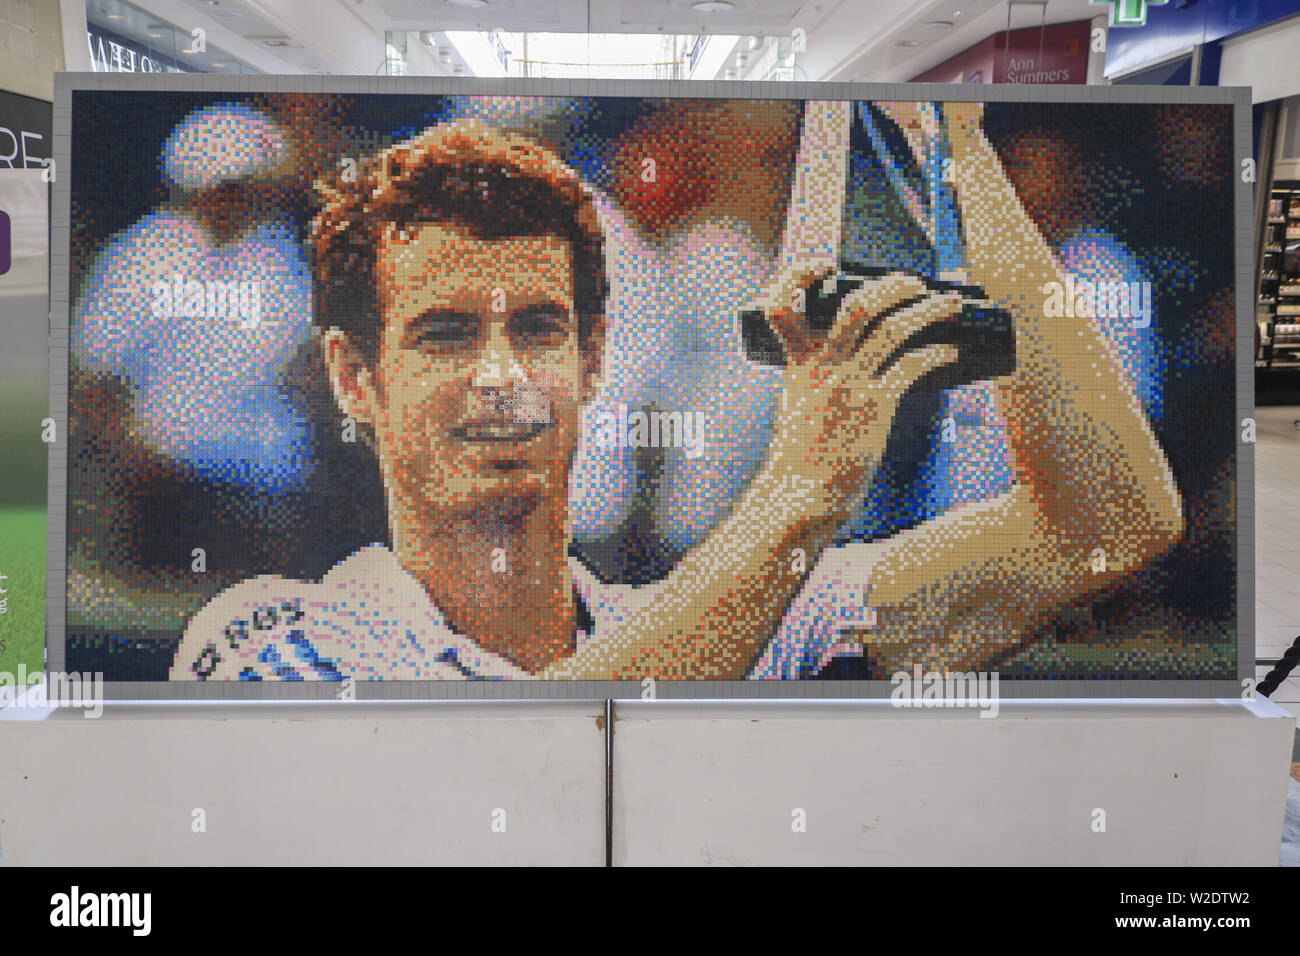 London, UK. 8th July, 2019. A mosaic of British tennis player Andy Murray made of lego pieces is displayed at the Centre Court shopping centre in Wimbledon as part of Legend Lawn. Credit: Amer Ghazzal/SOPA Images/ZUMA Wire/Alamy Live News Stock Photo